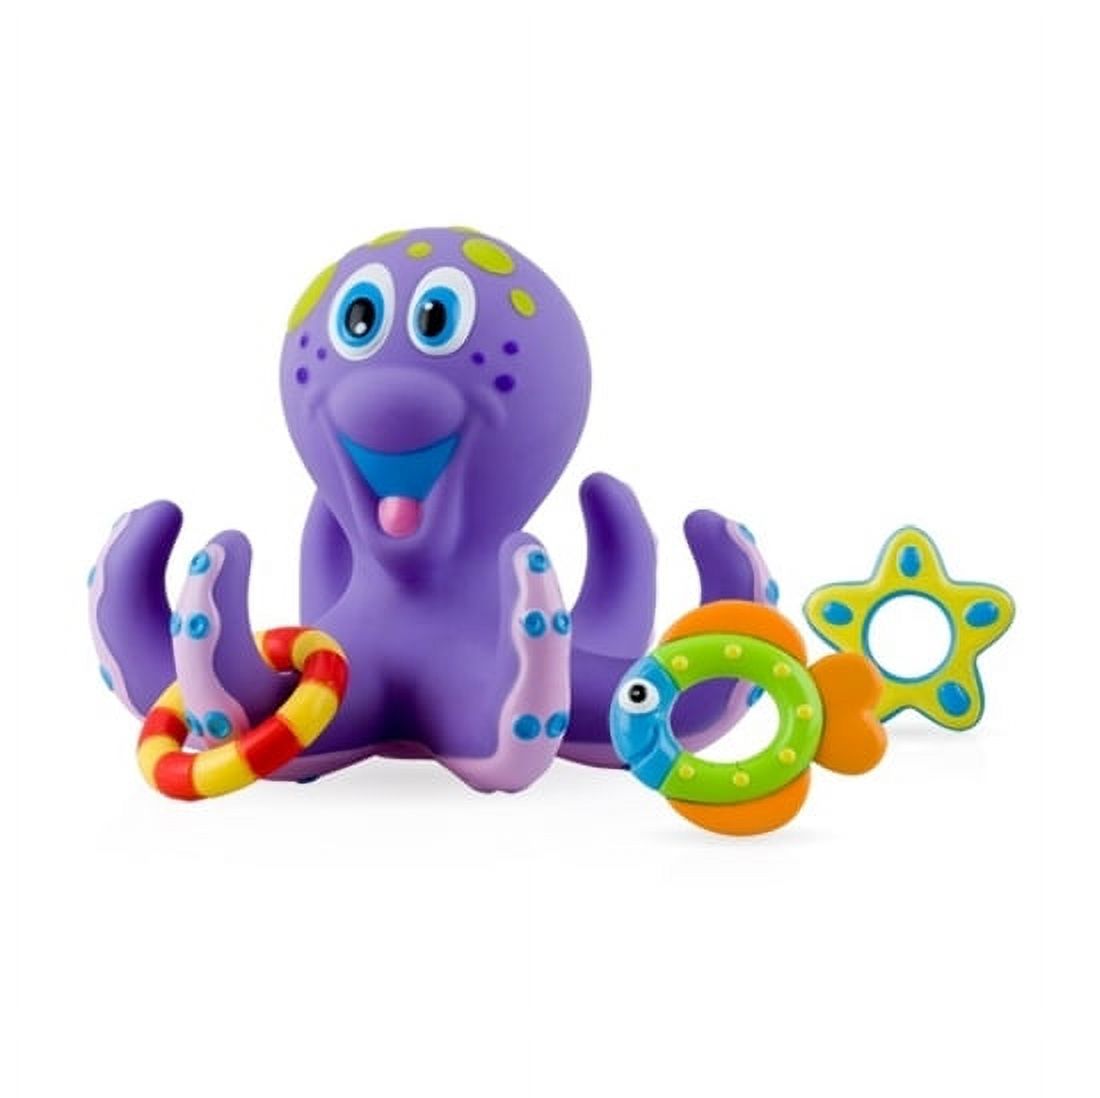 Nuby Octopus Bath Toss Toy - image 1 of 5